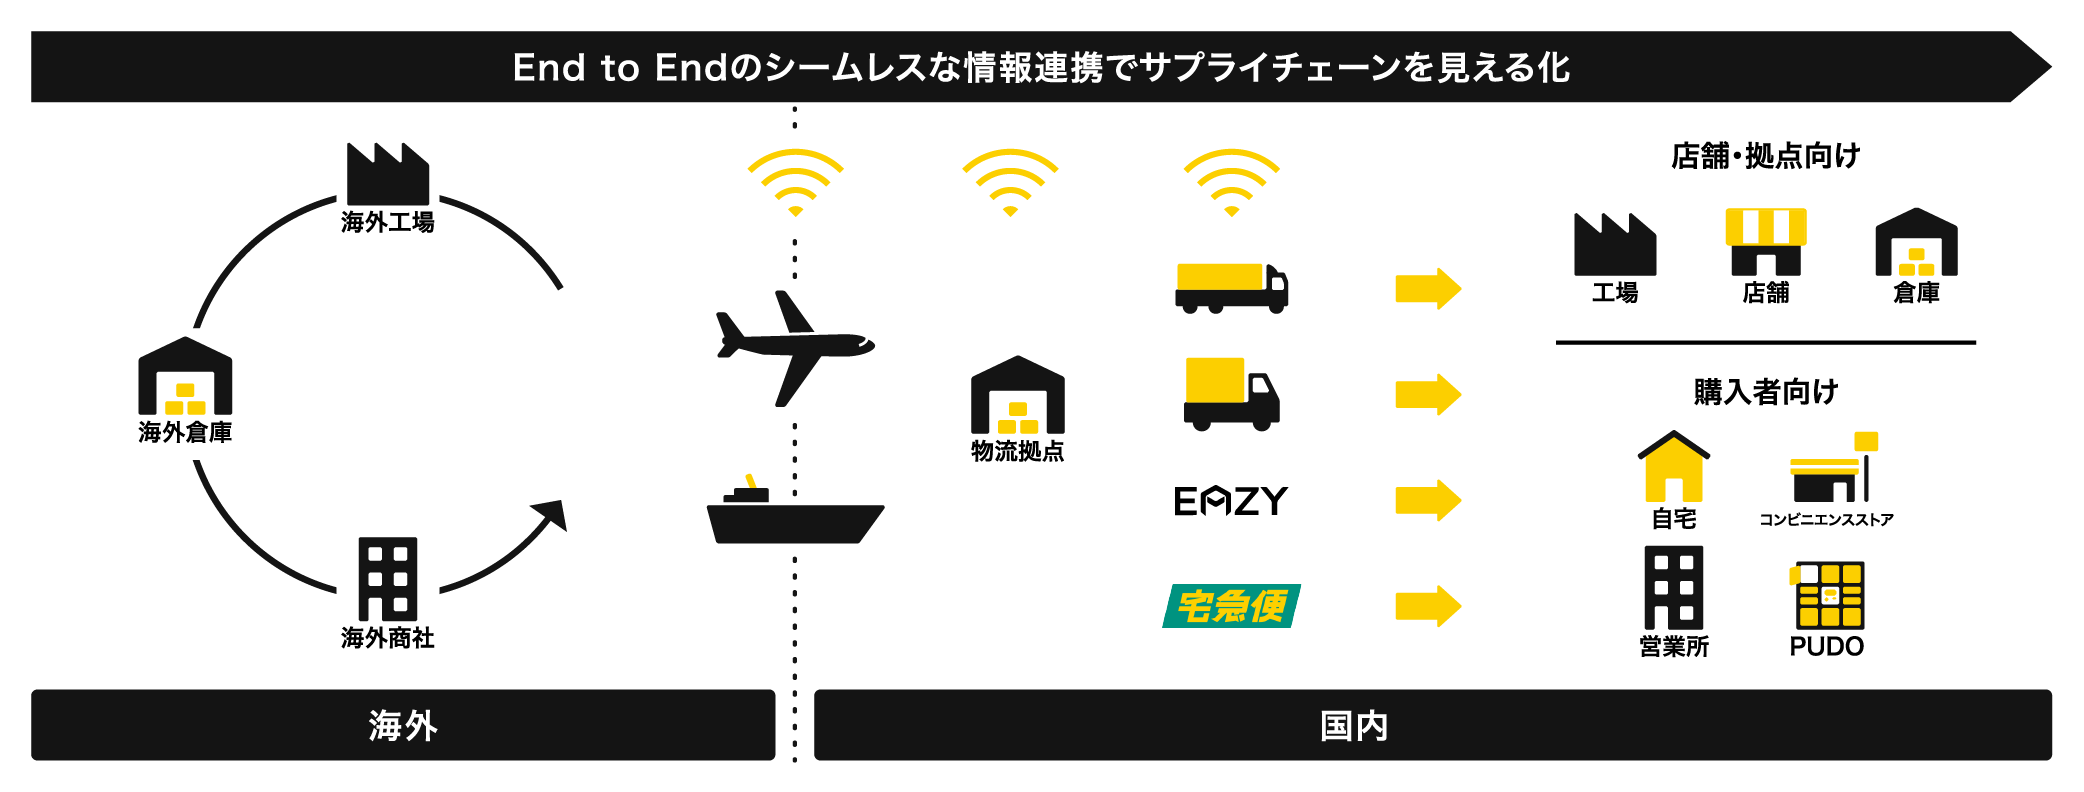 End to Endのシームレスな情報連携でサプライズチェーンを見える化